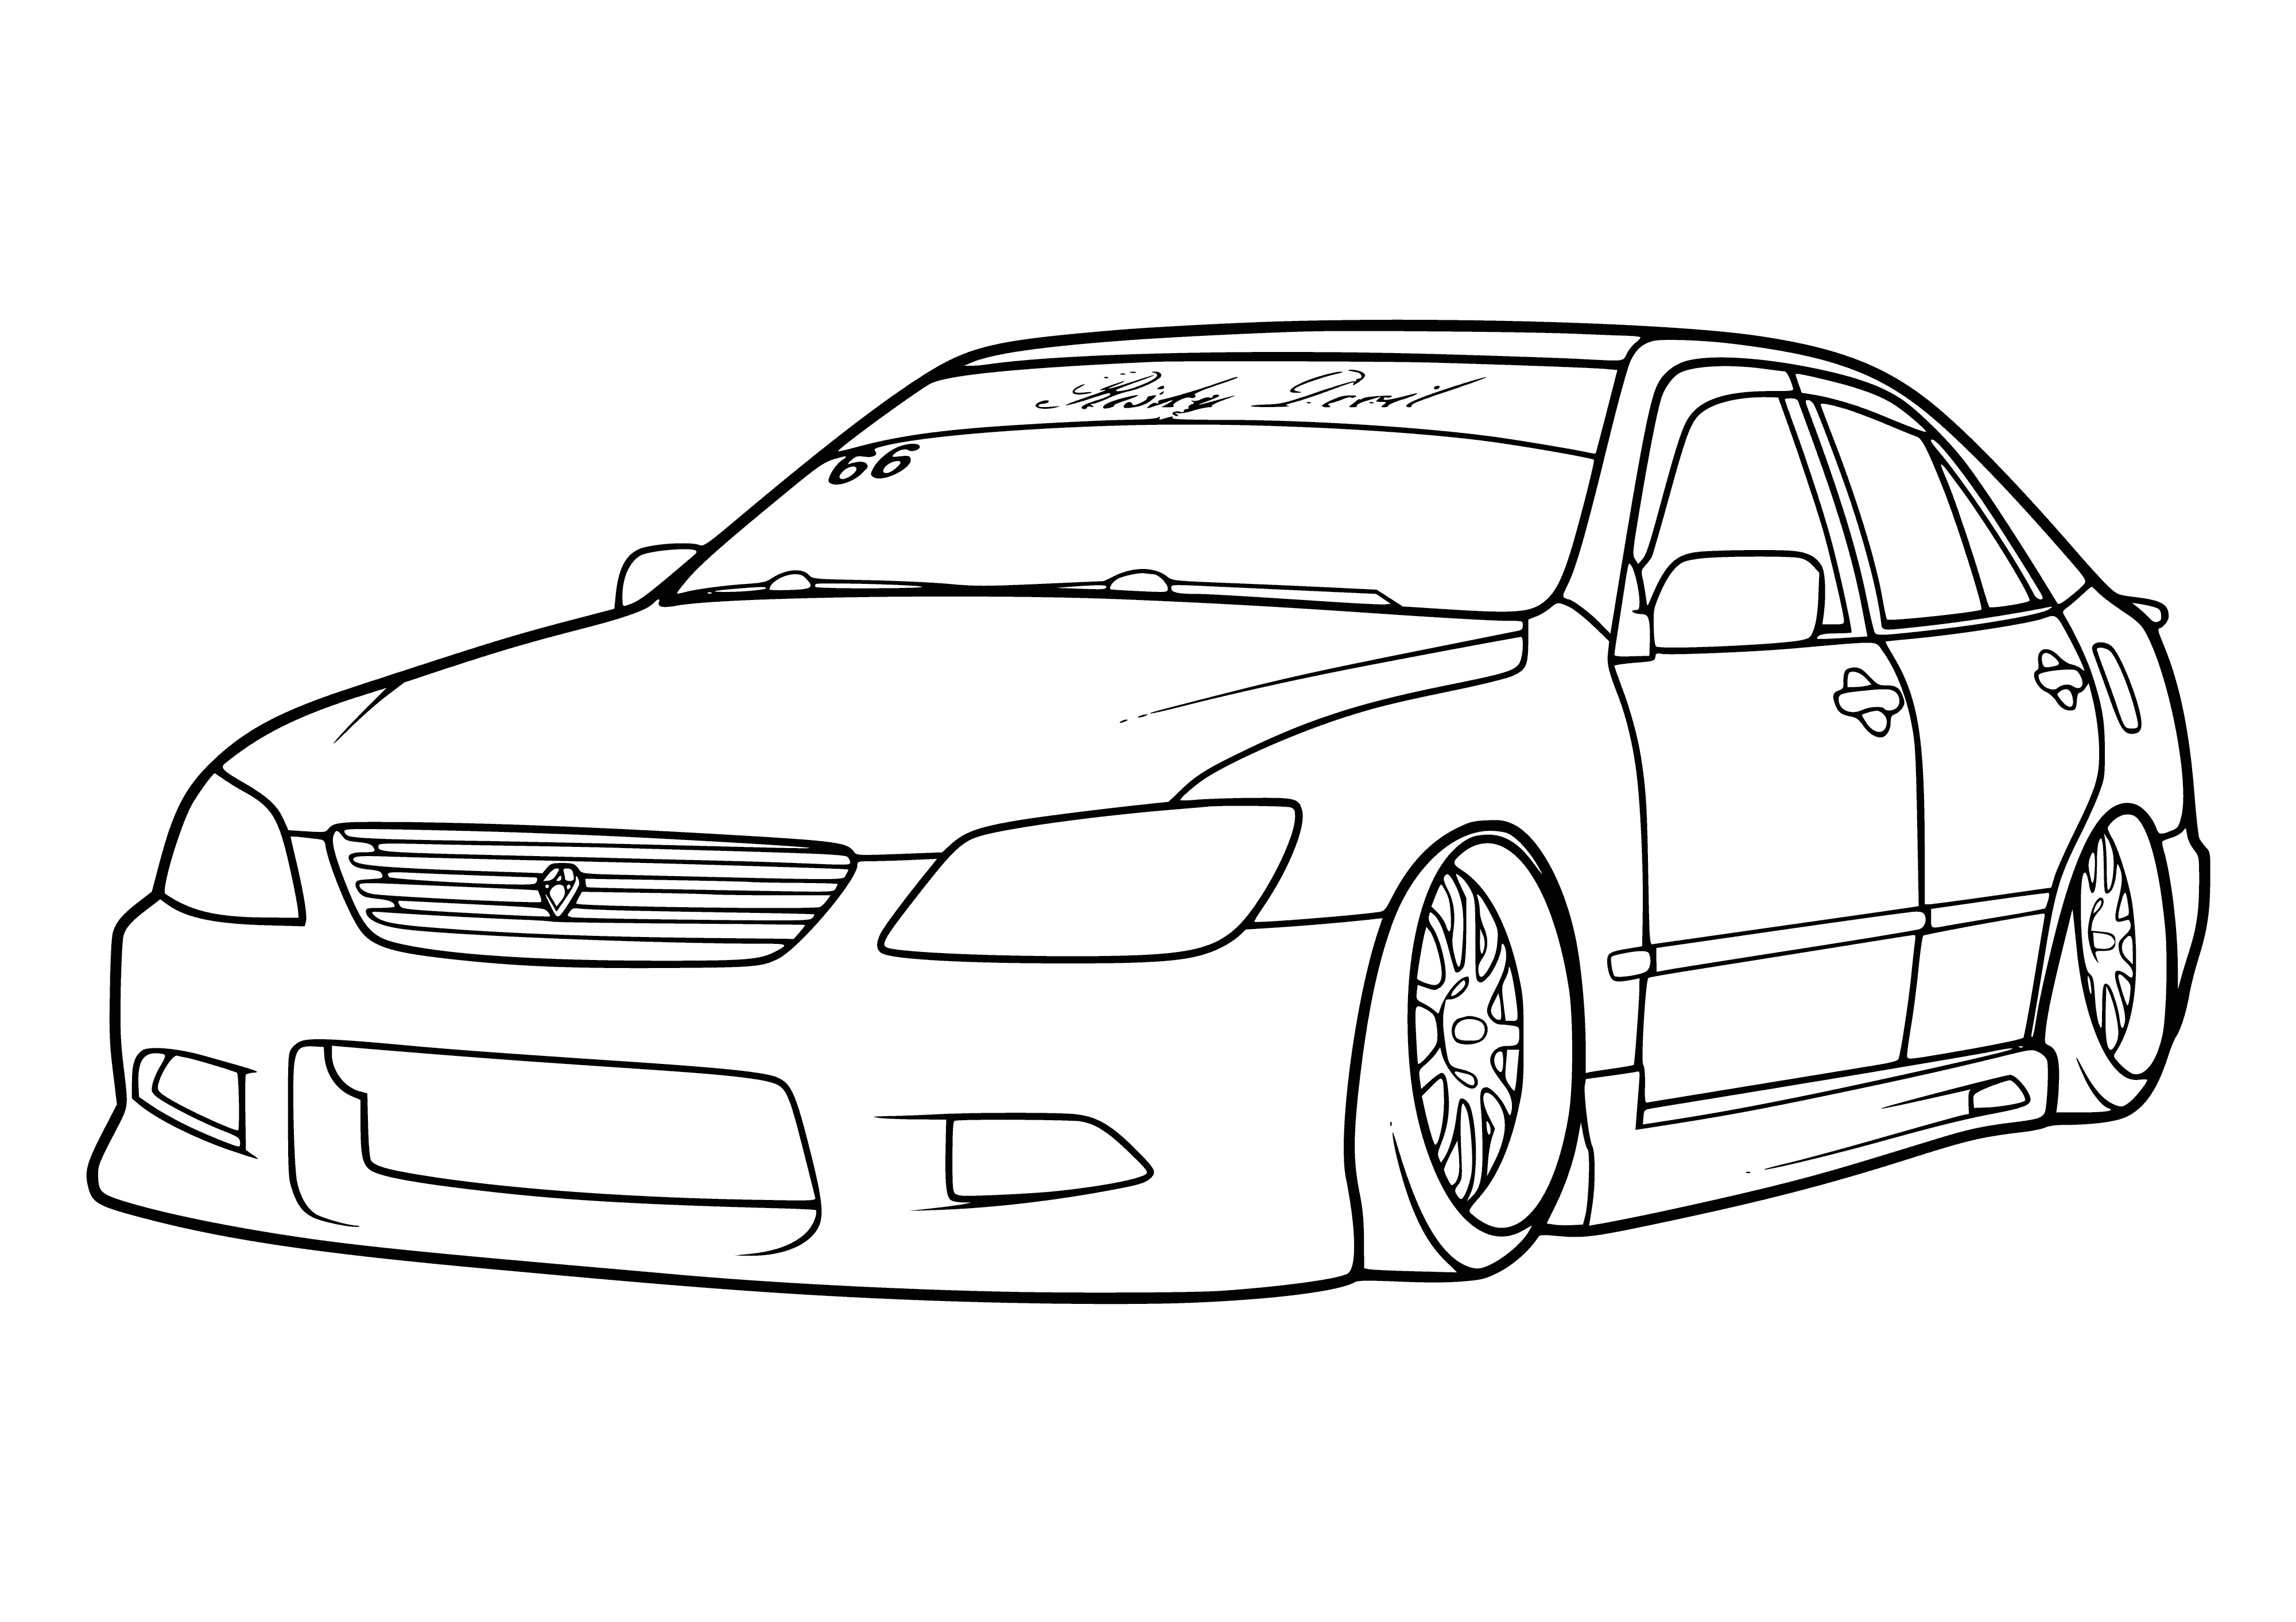 coloring page: Blue car parked on side of road; four doors, trunk, facing right.